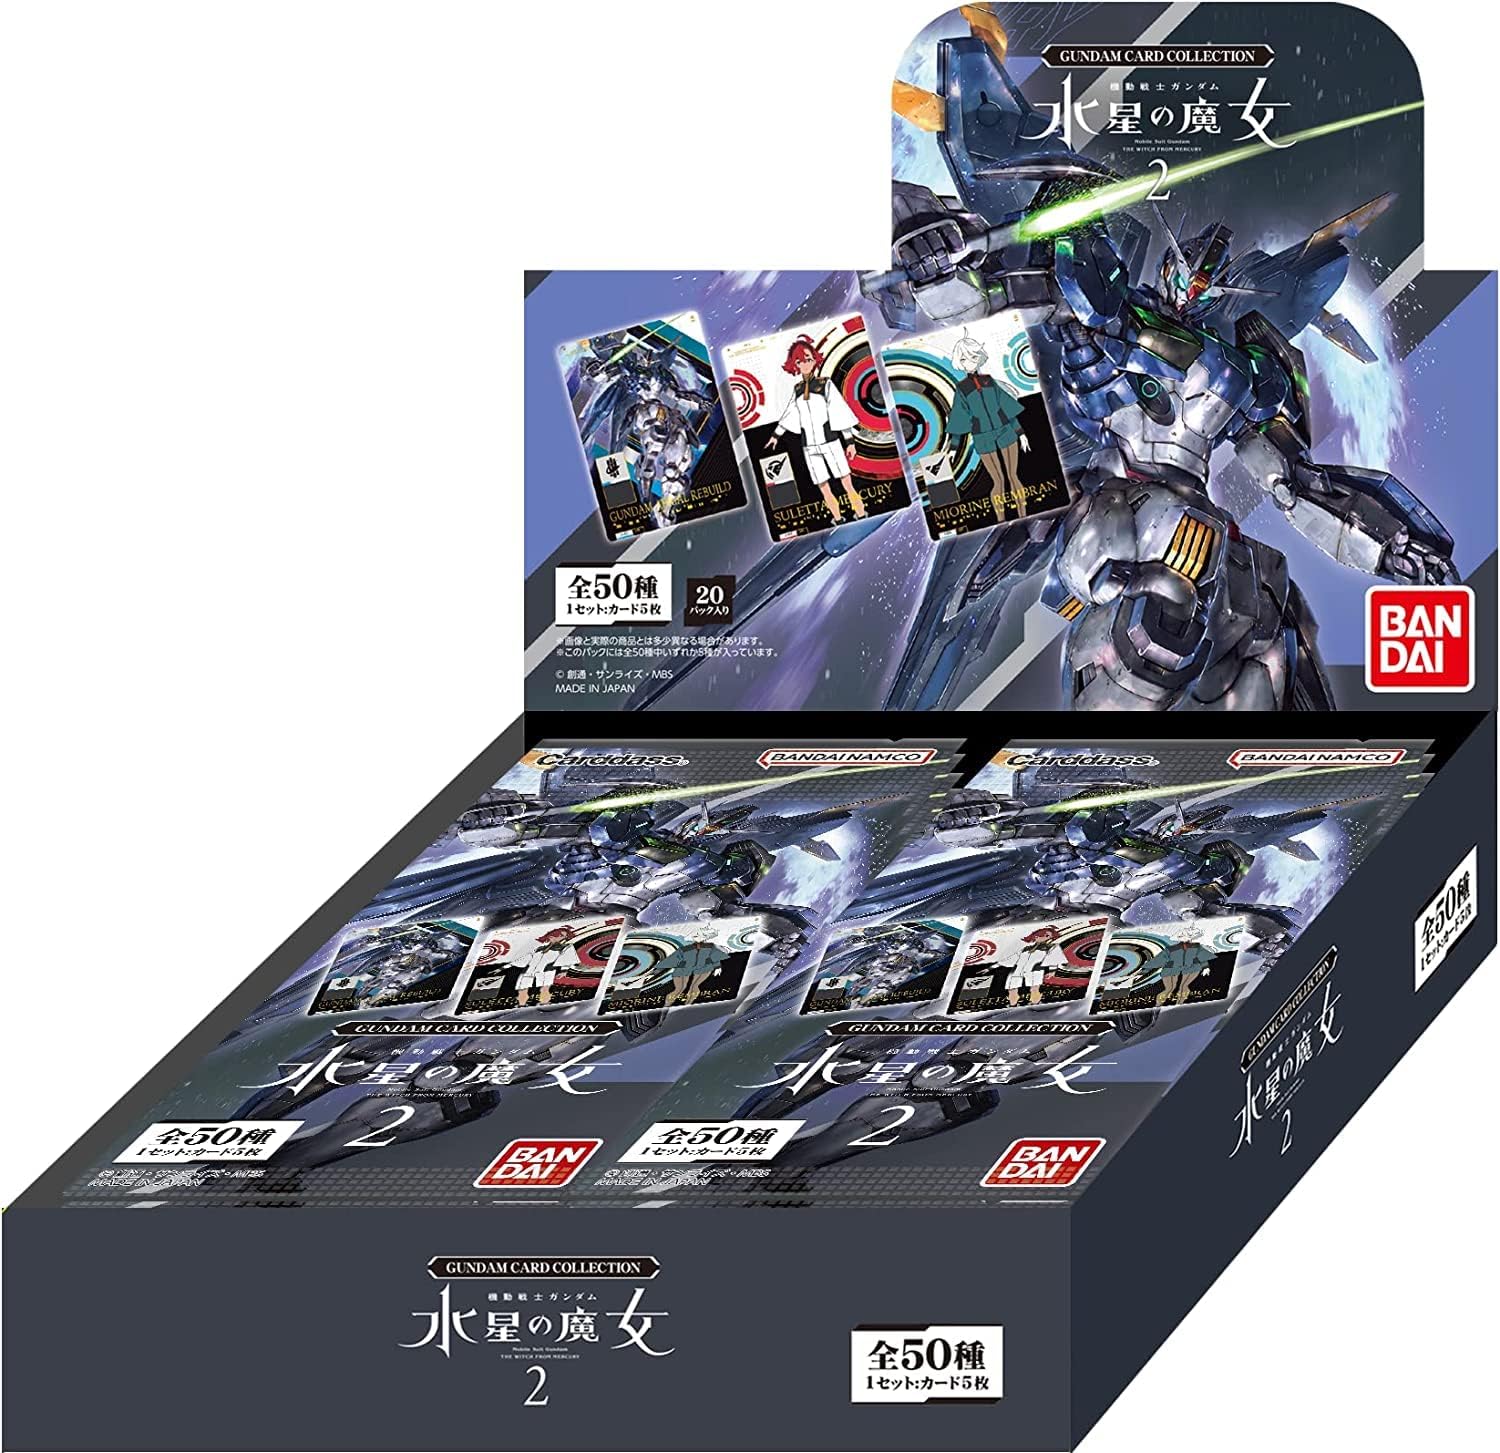 Gundam Card Collection GANDAM CARD COLLECTION Mobile Suit Gundam Witch of Mercury 2 Box